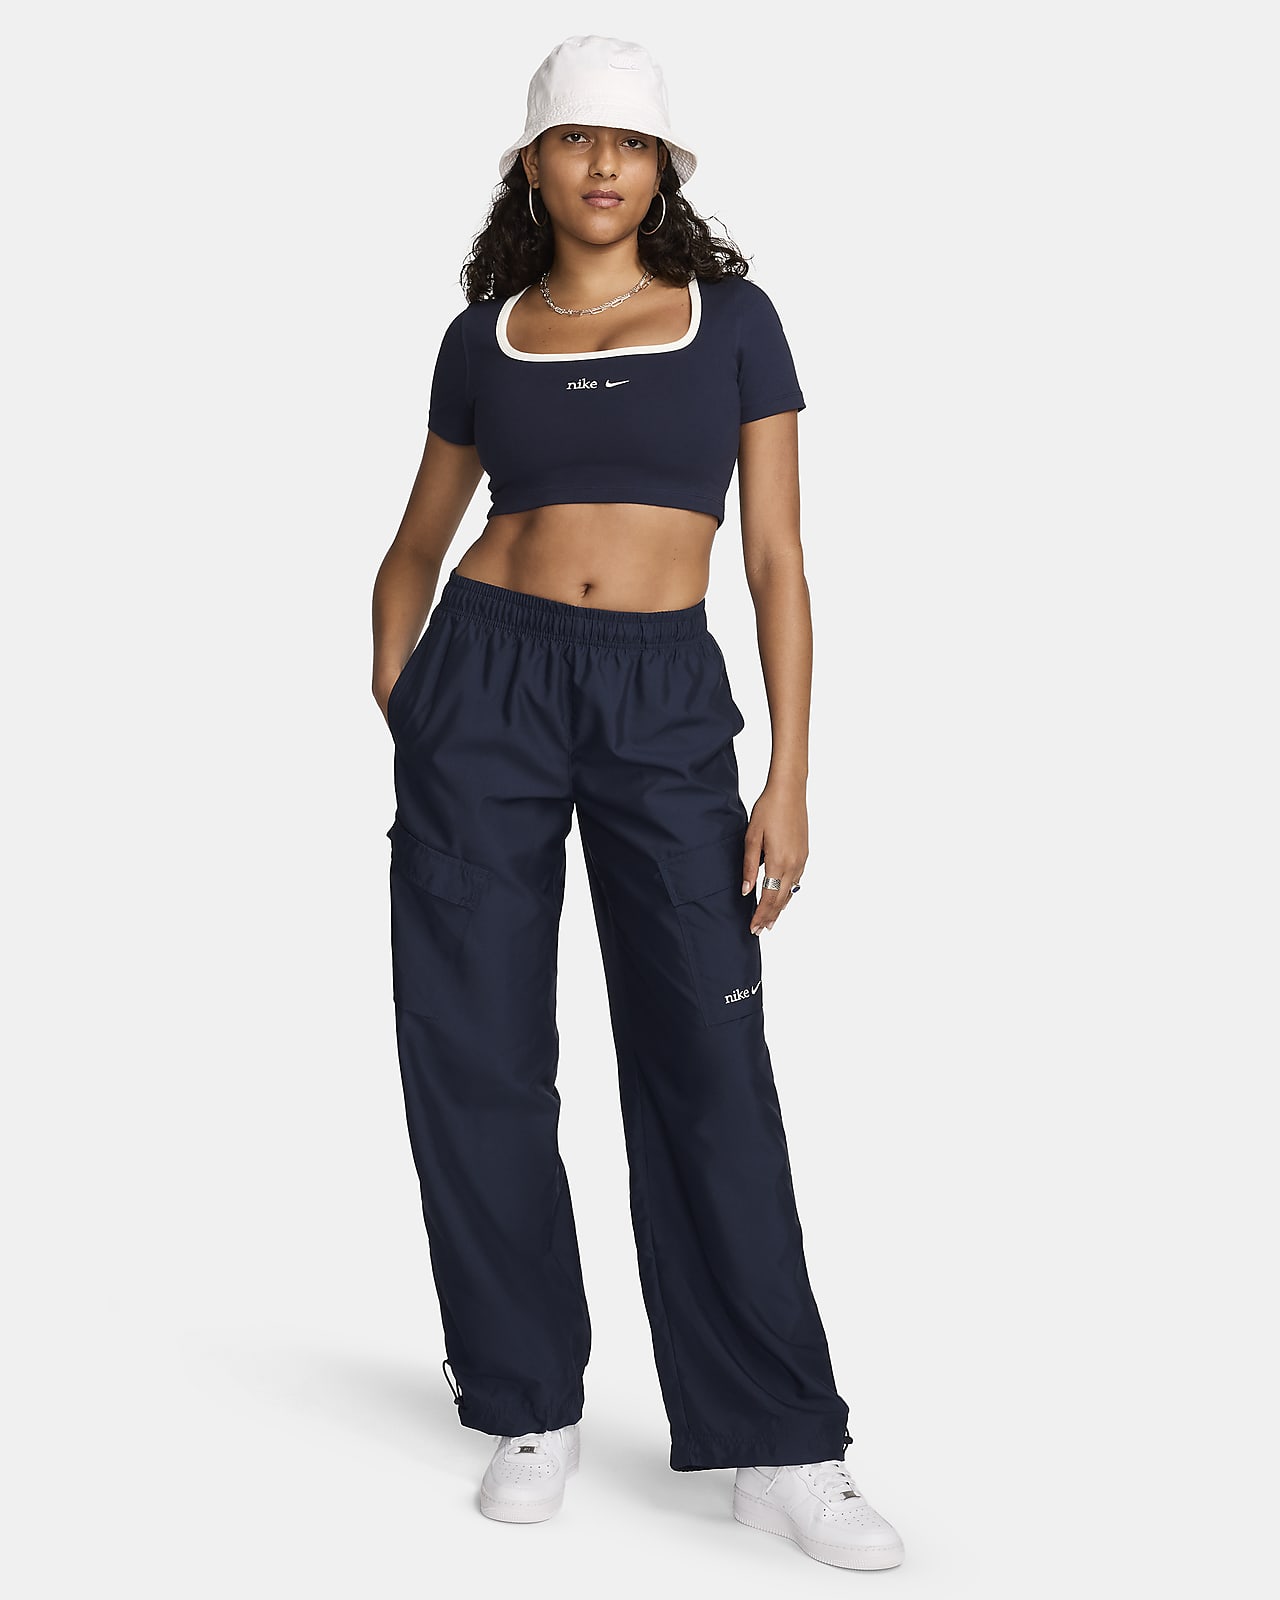 https://static.nike.com/a/images/t_PDP_1280_v1/f_auto,q_auto:eco/3fae3964-4d03-4329-baaa-95a90e8c0d2a/sportswear-woven-cargo-trousers-TwTmWW.png